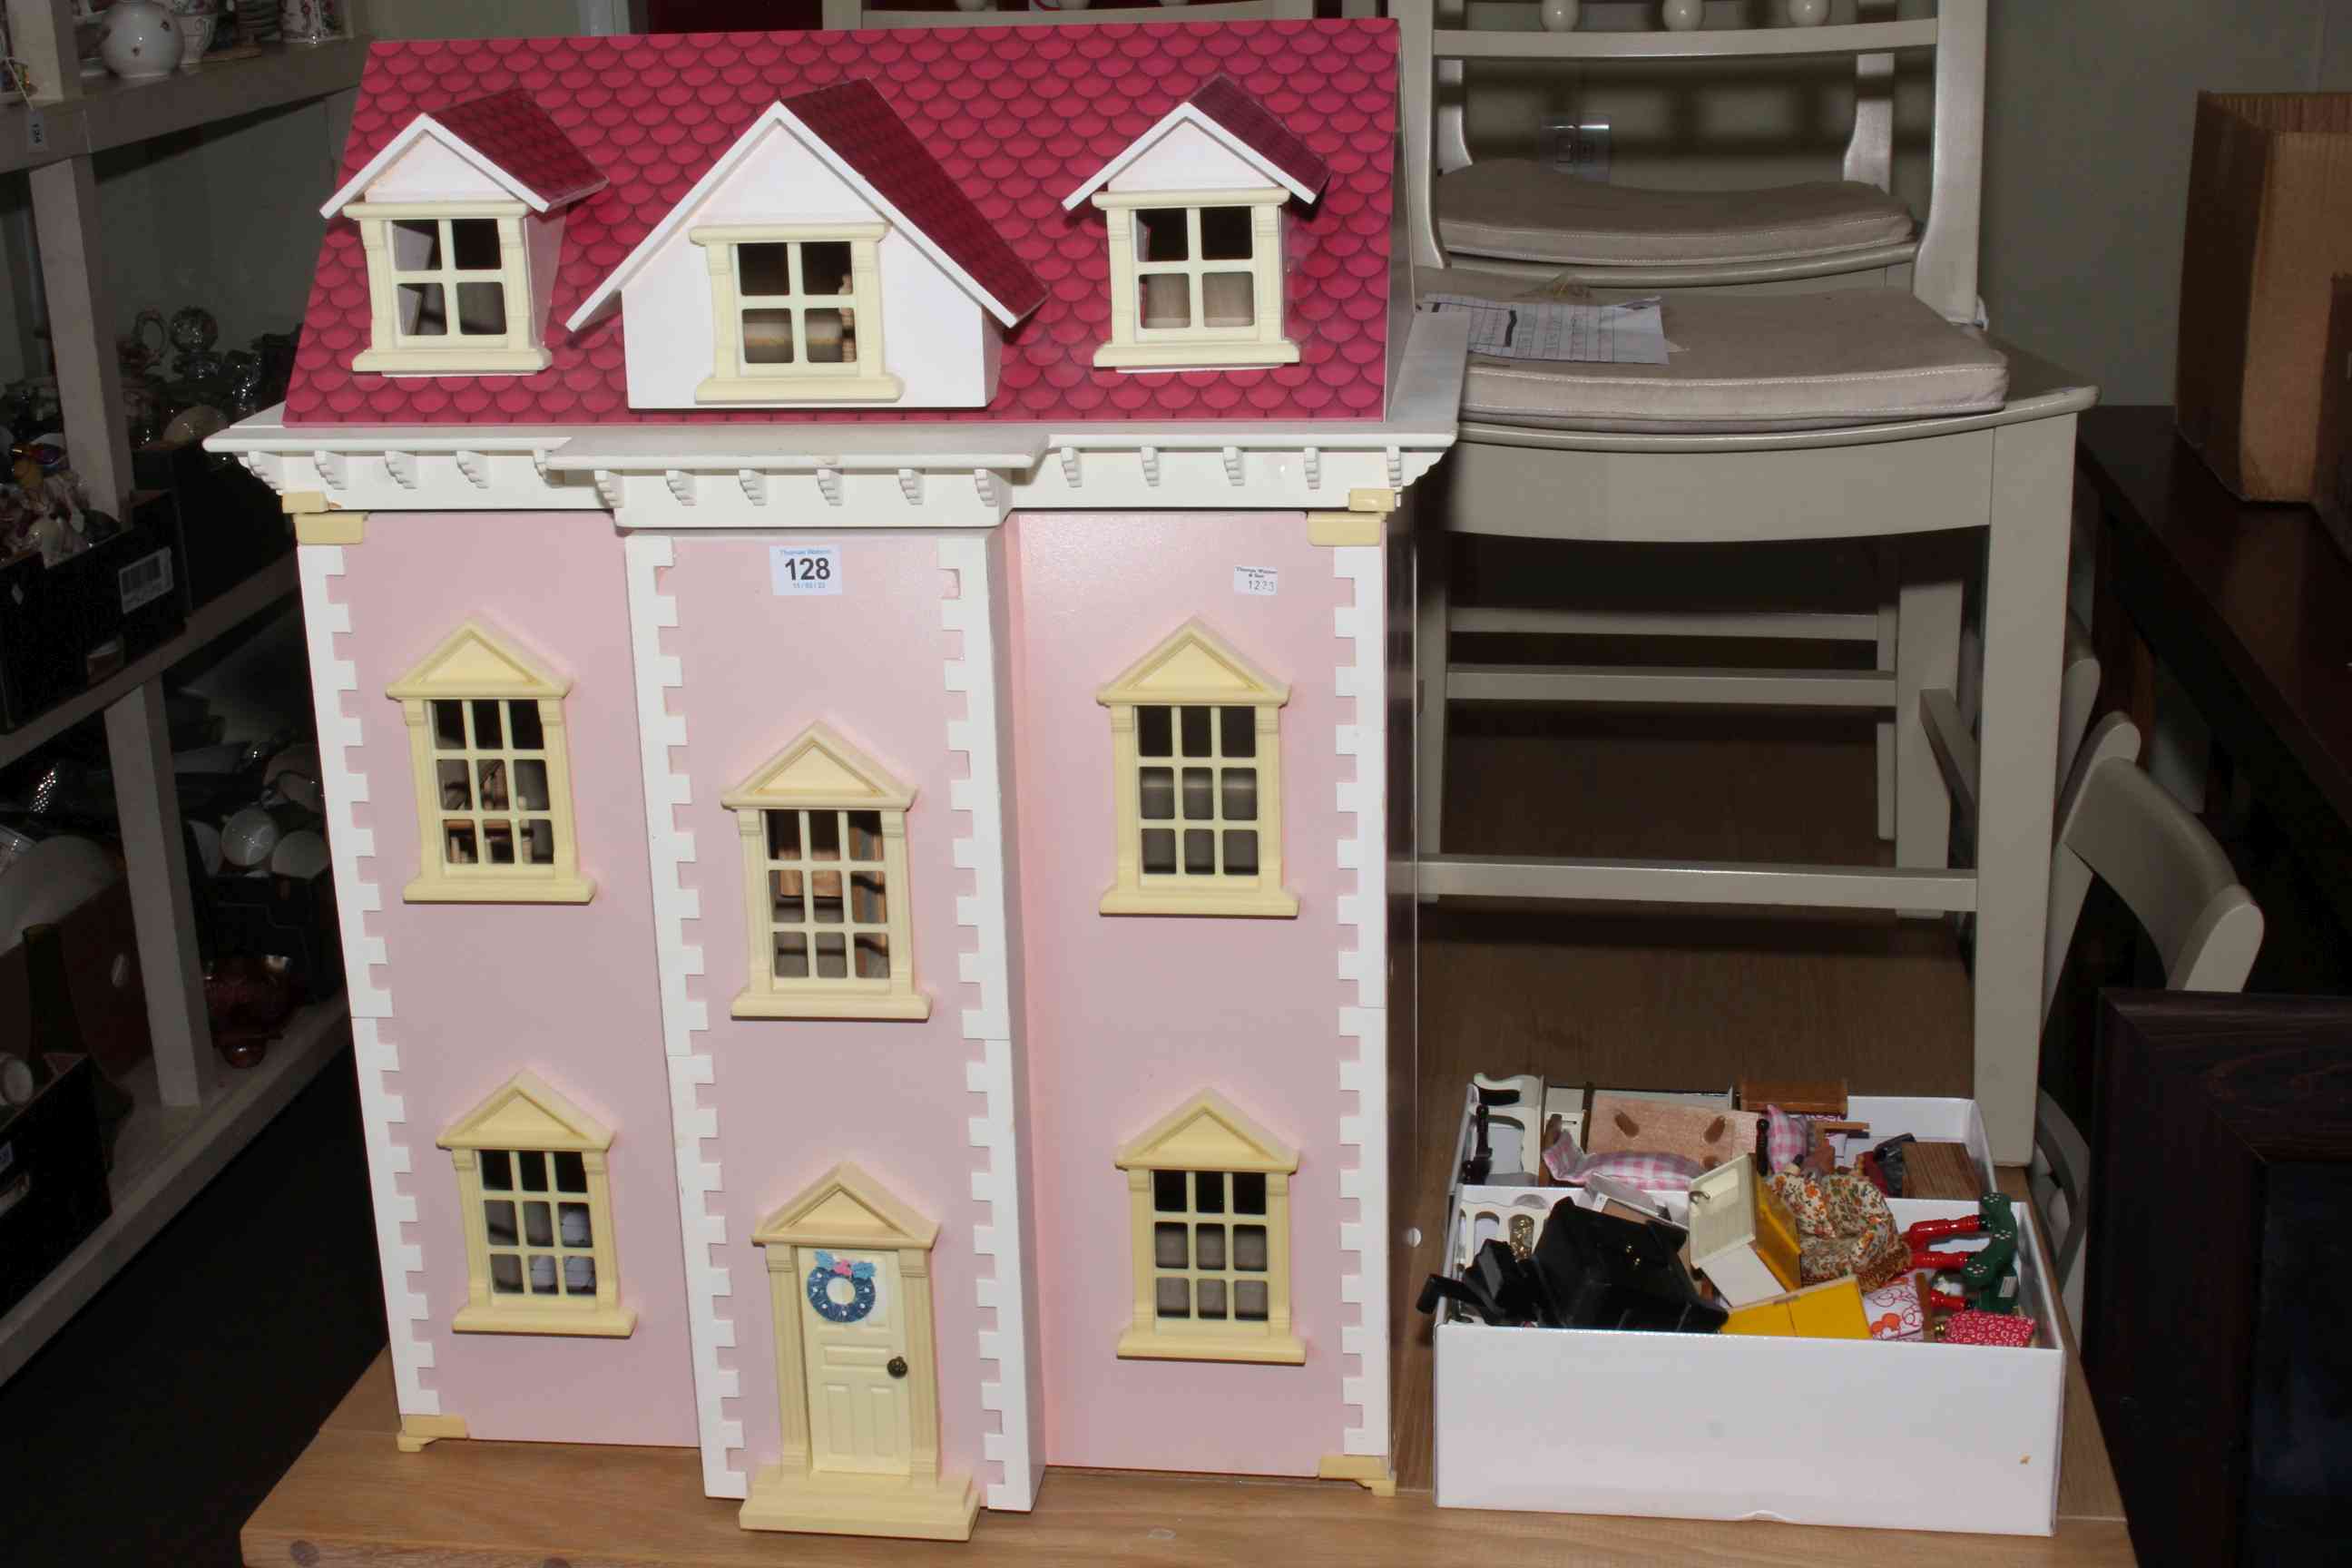 Dolls house and furnishings.